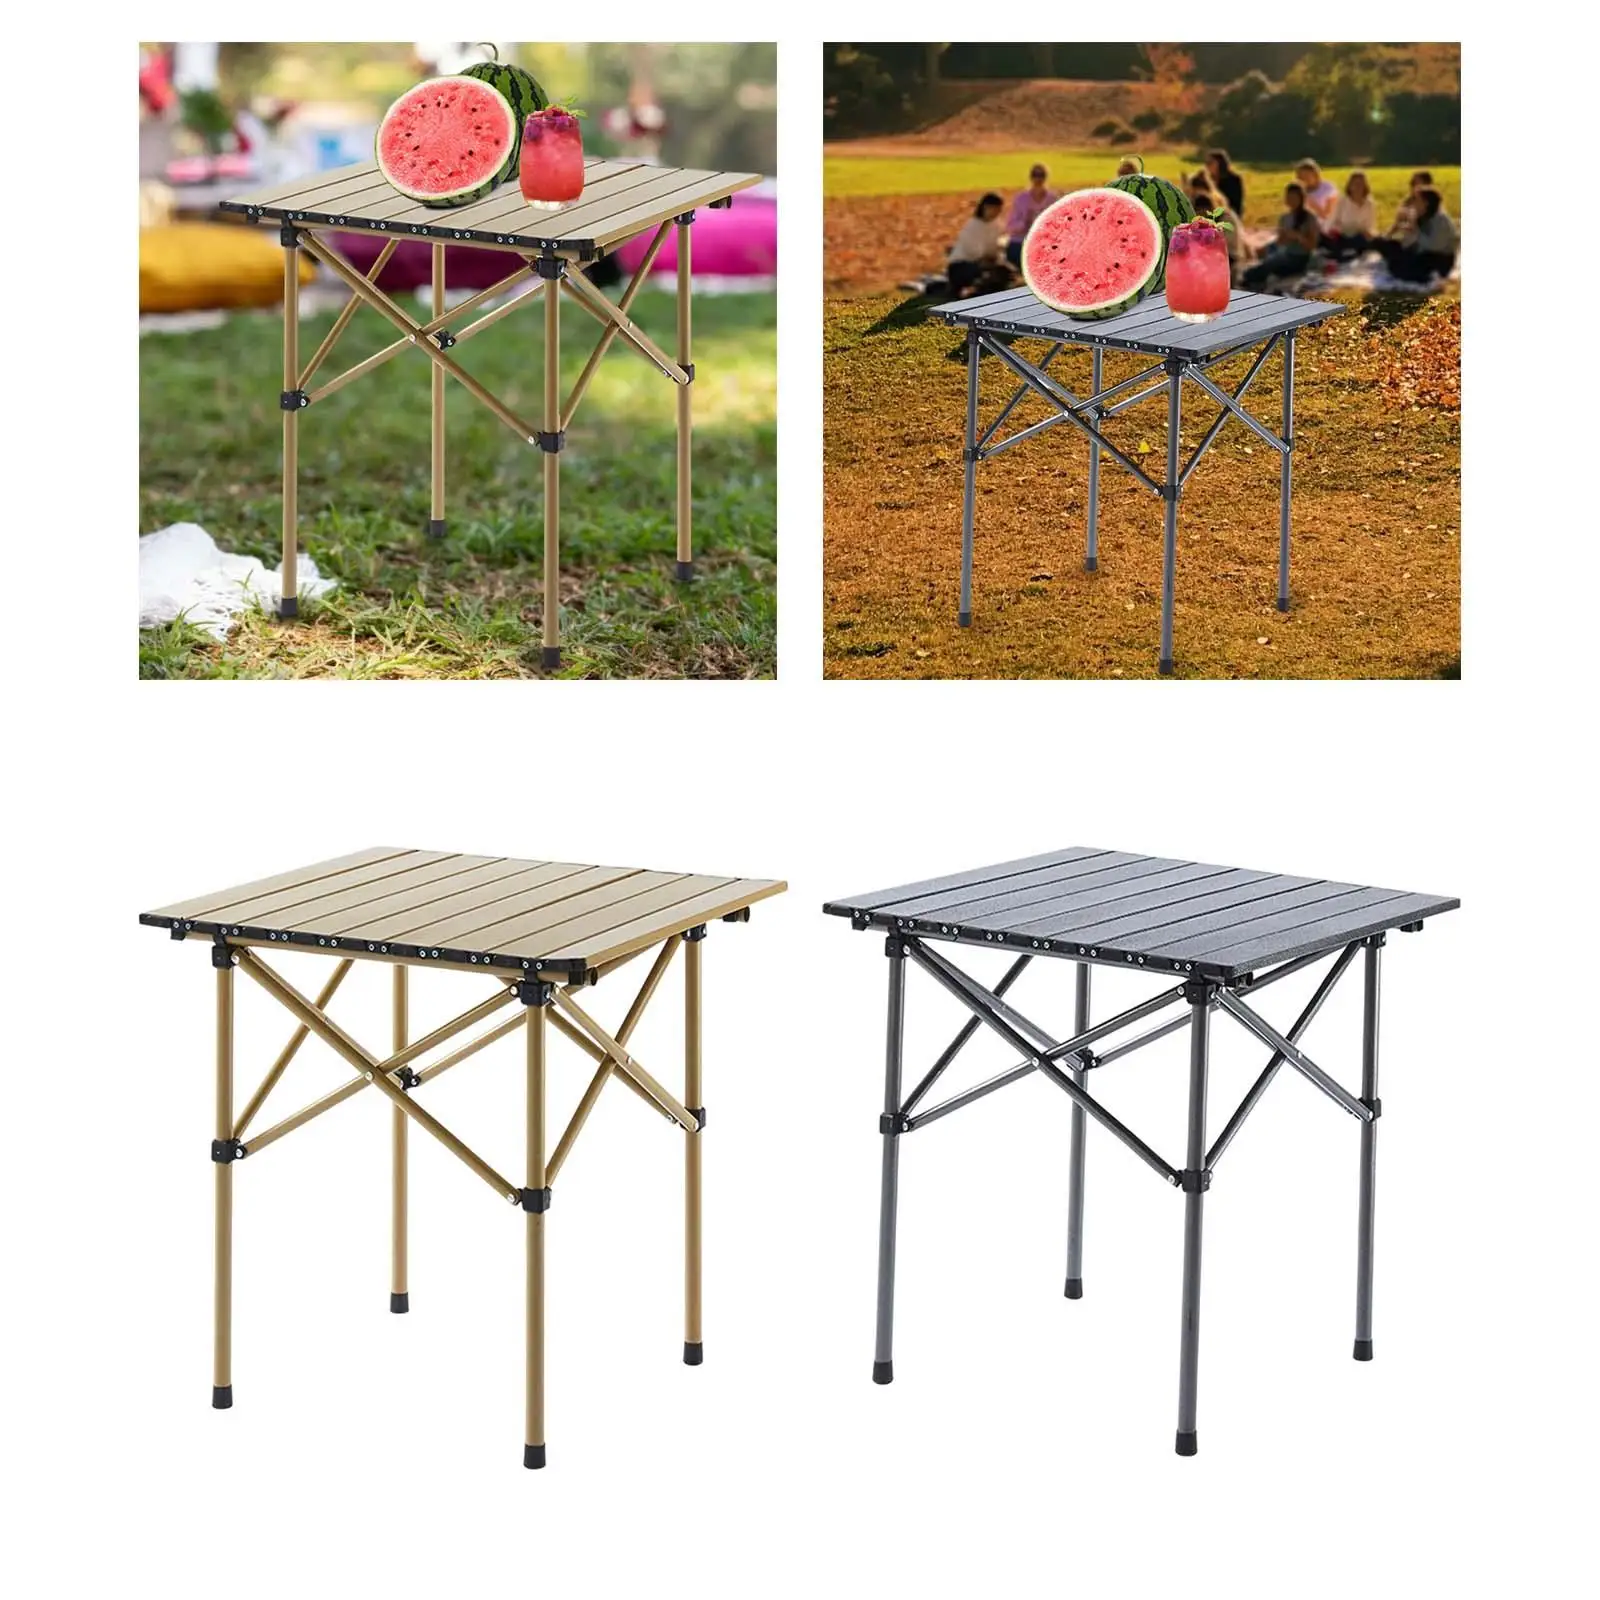 Portable Lightweight Camping Folding Table Rack Collapsible Furniture Desk Tableware for Fishing Beach Hiking Outdoor Backyard